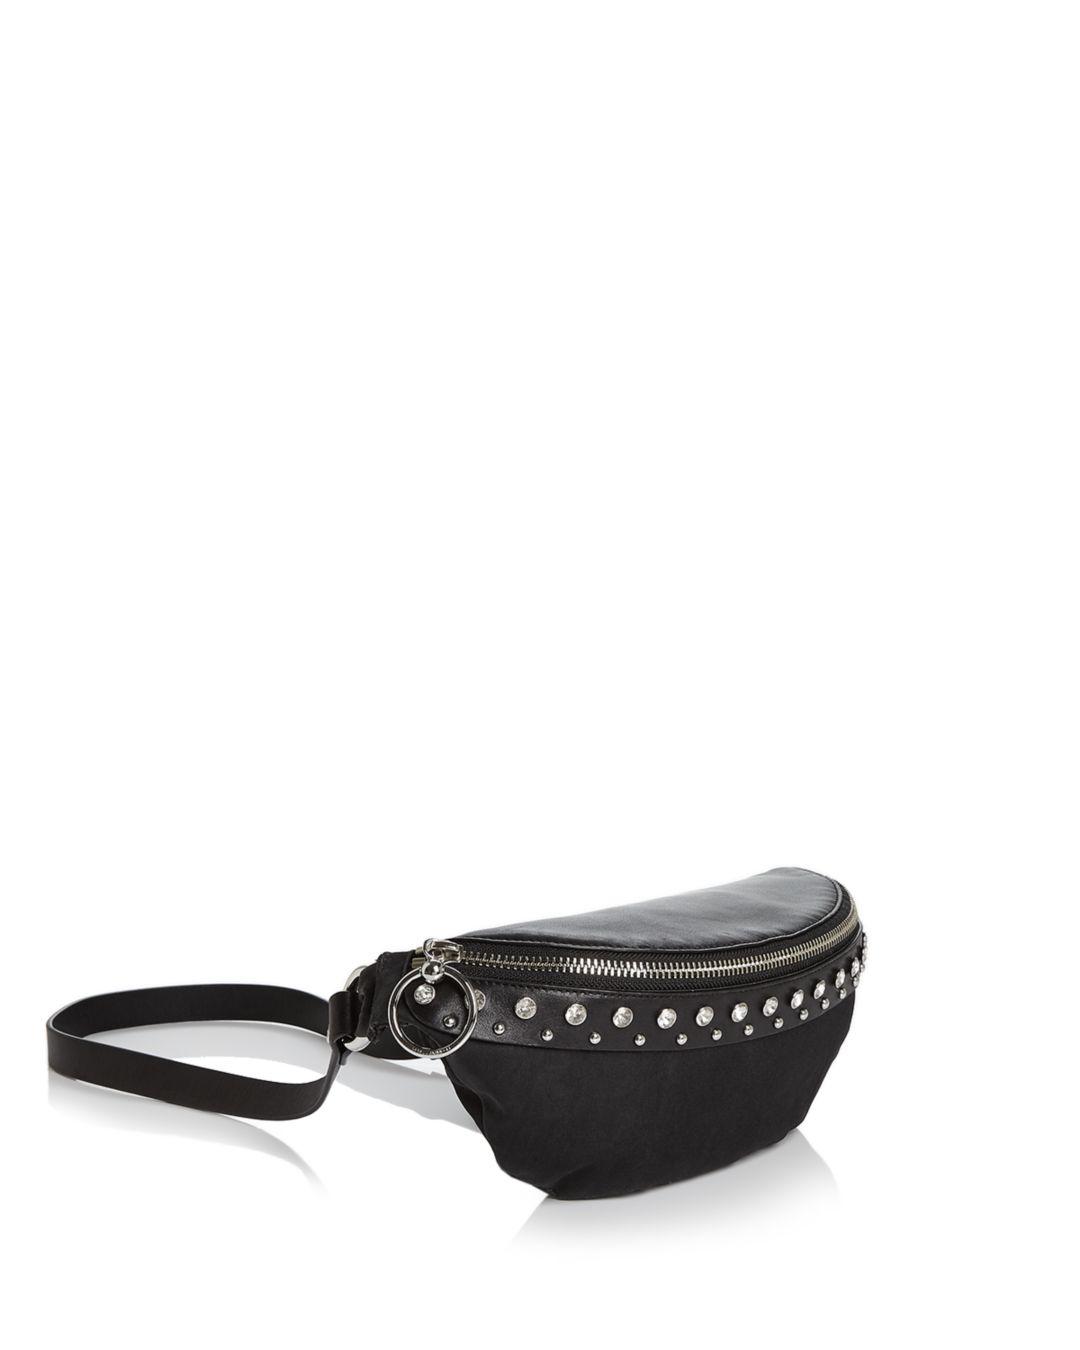 Rebecca Minkoff Synthetic Crystal Studded Nylon & Leather Convertible Belt Bag in Black/Silver ...